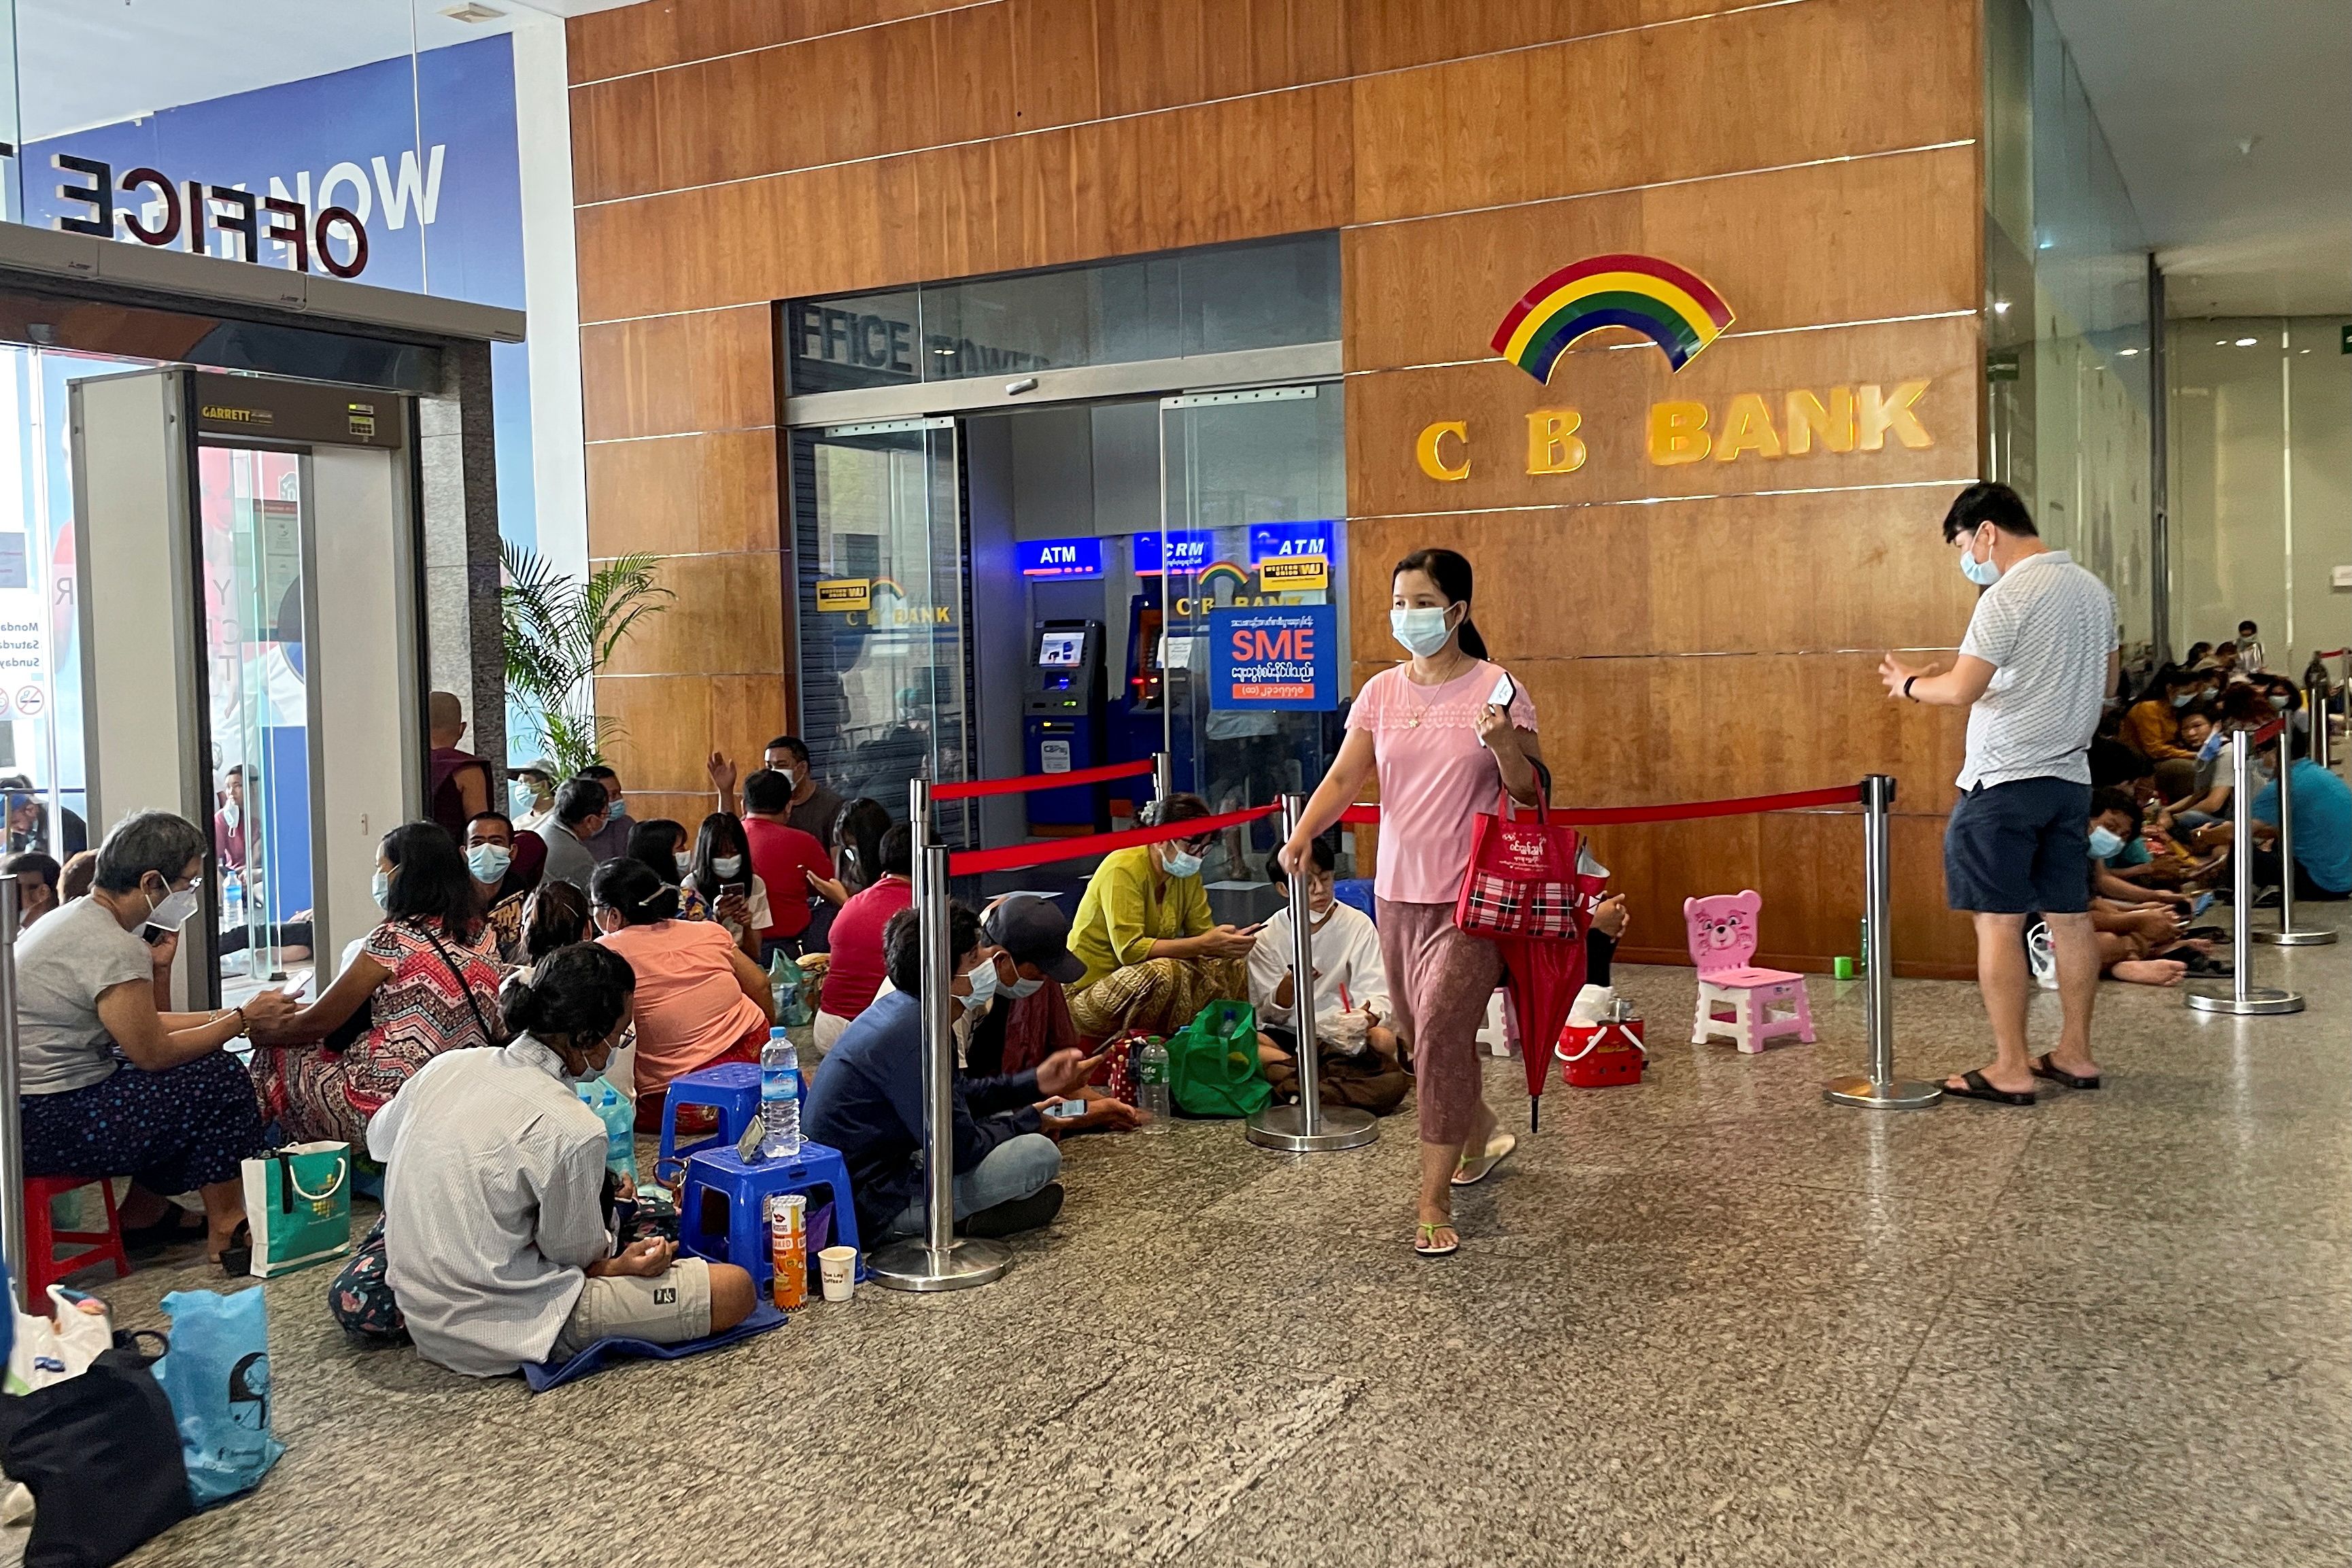 People line up outside a bank to withdraw cash, in Yangon, Myanmar May 13, 2021. REUTERS/Stringer